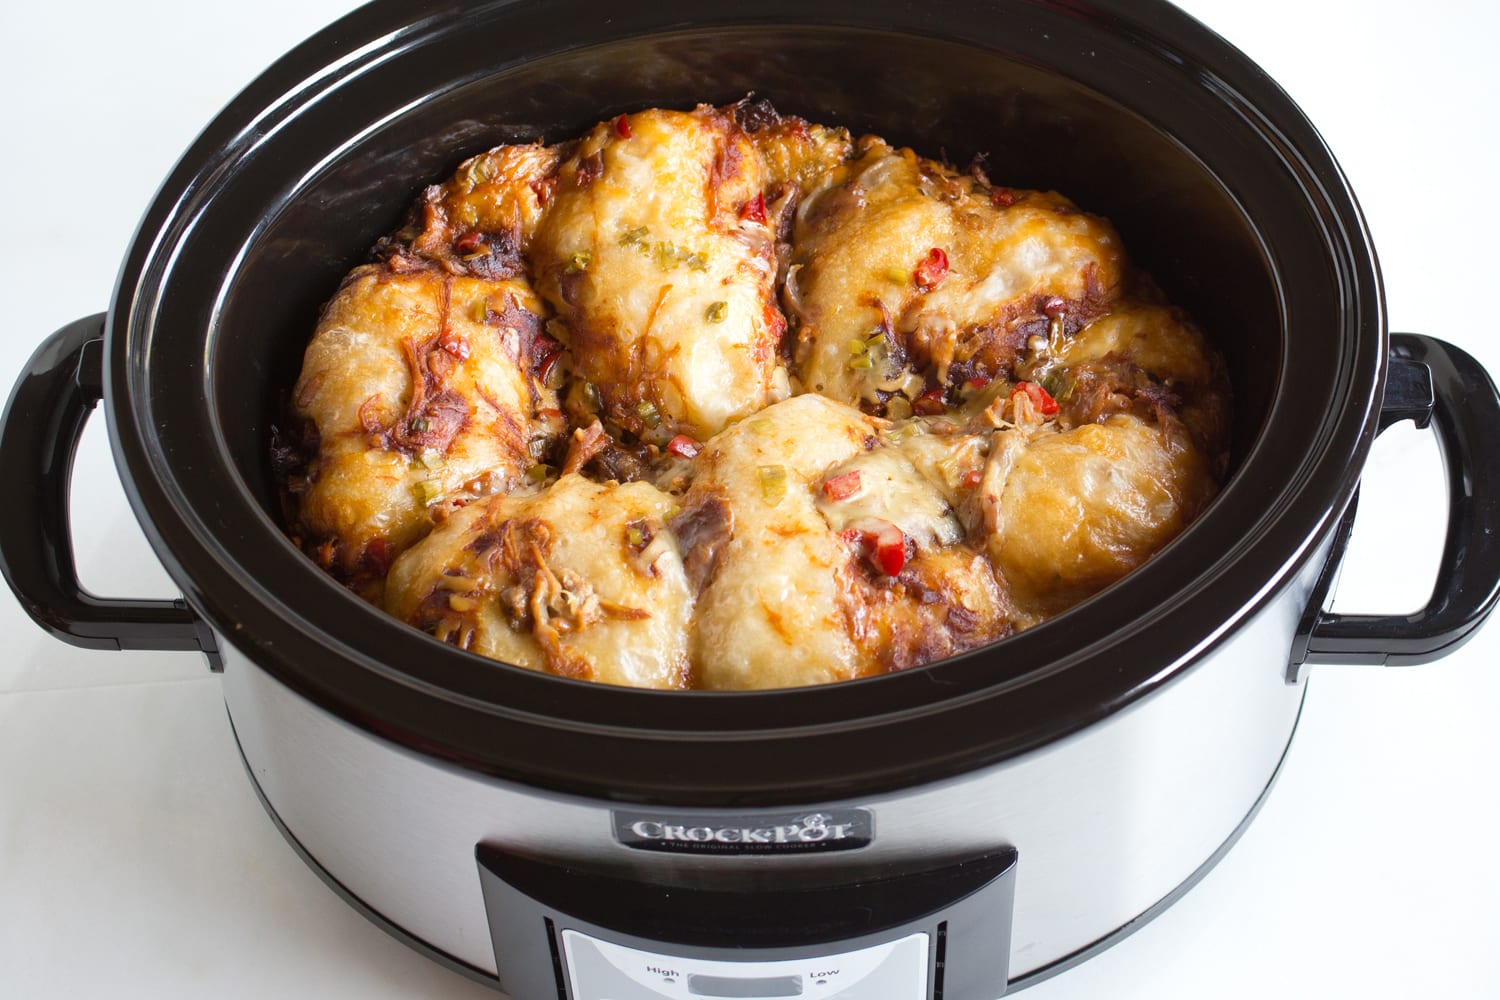 https://media-cldnry.s-nbcnews.com/image/upload/newscms/2015_38/780906/slow-cooker-biscuit-breakfast-casserole-today-150916.jpg